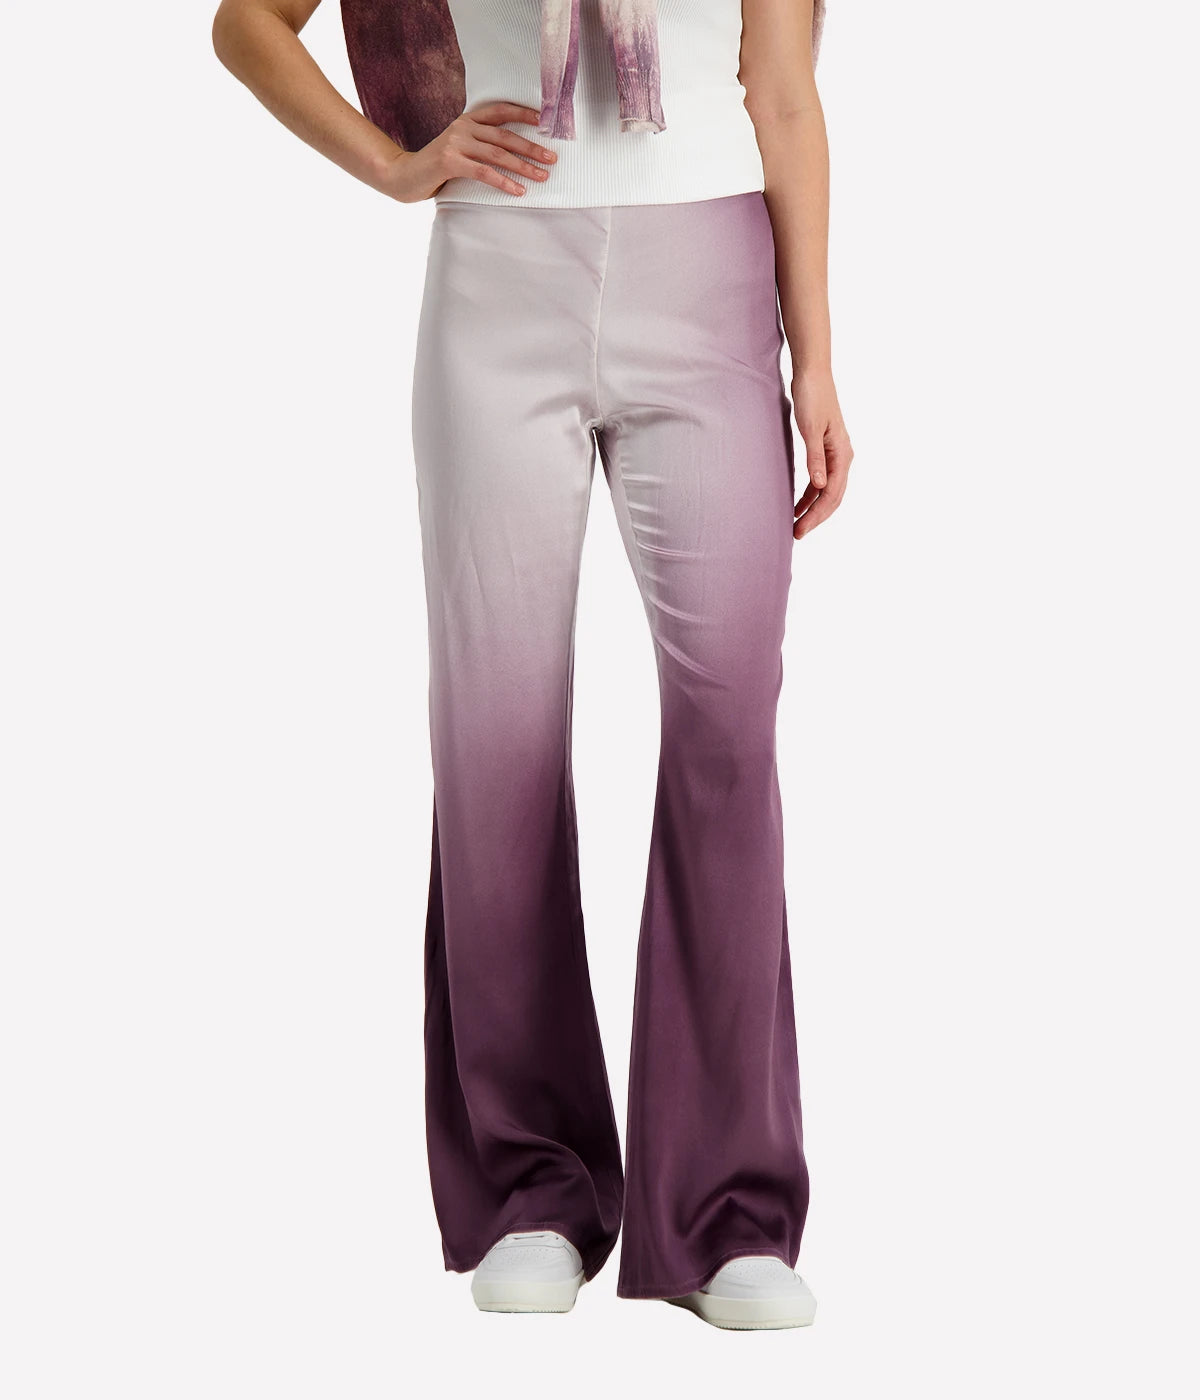 Flares purple degrade silk pants with a flared leg